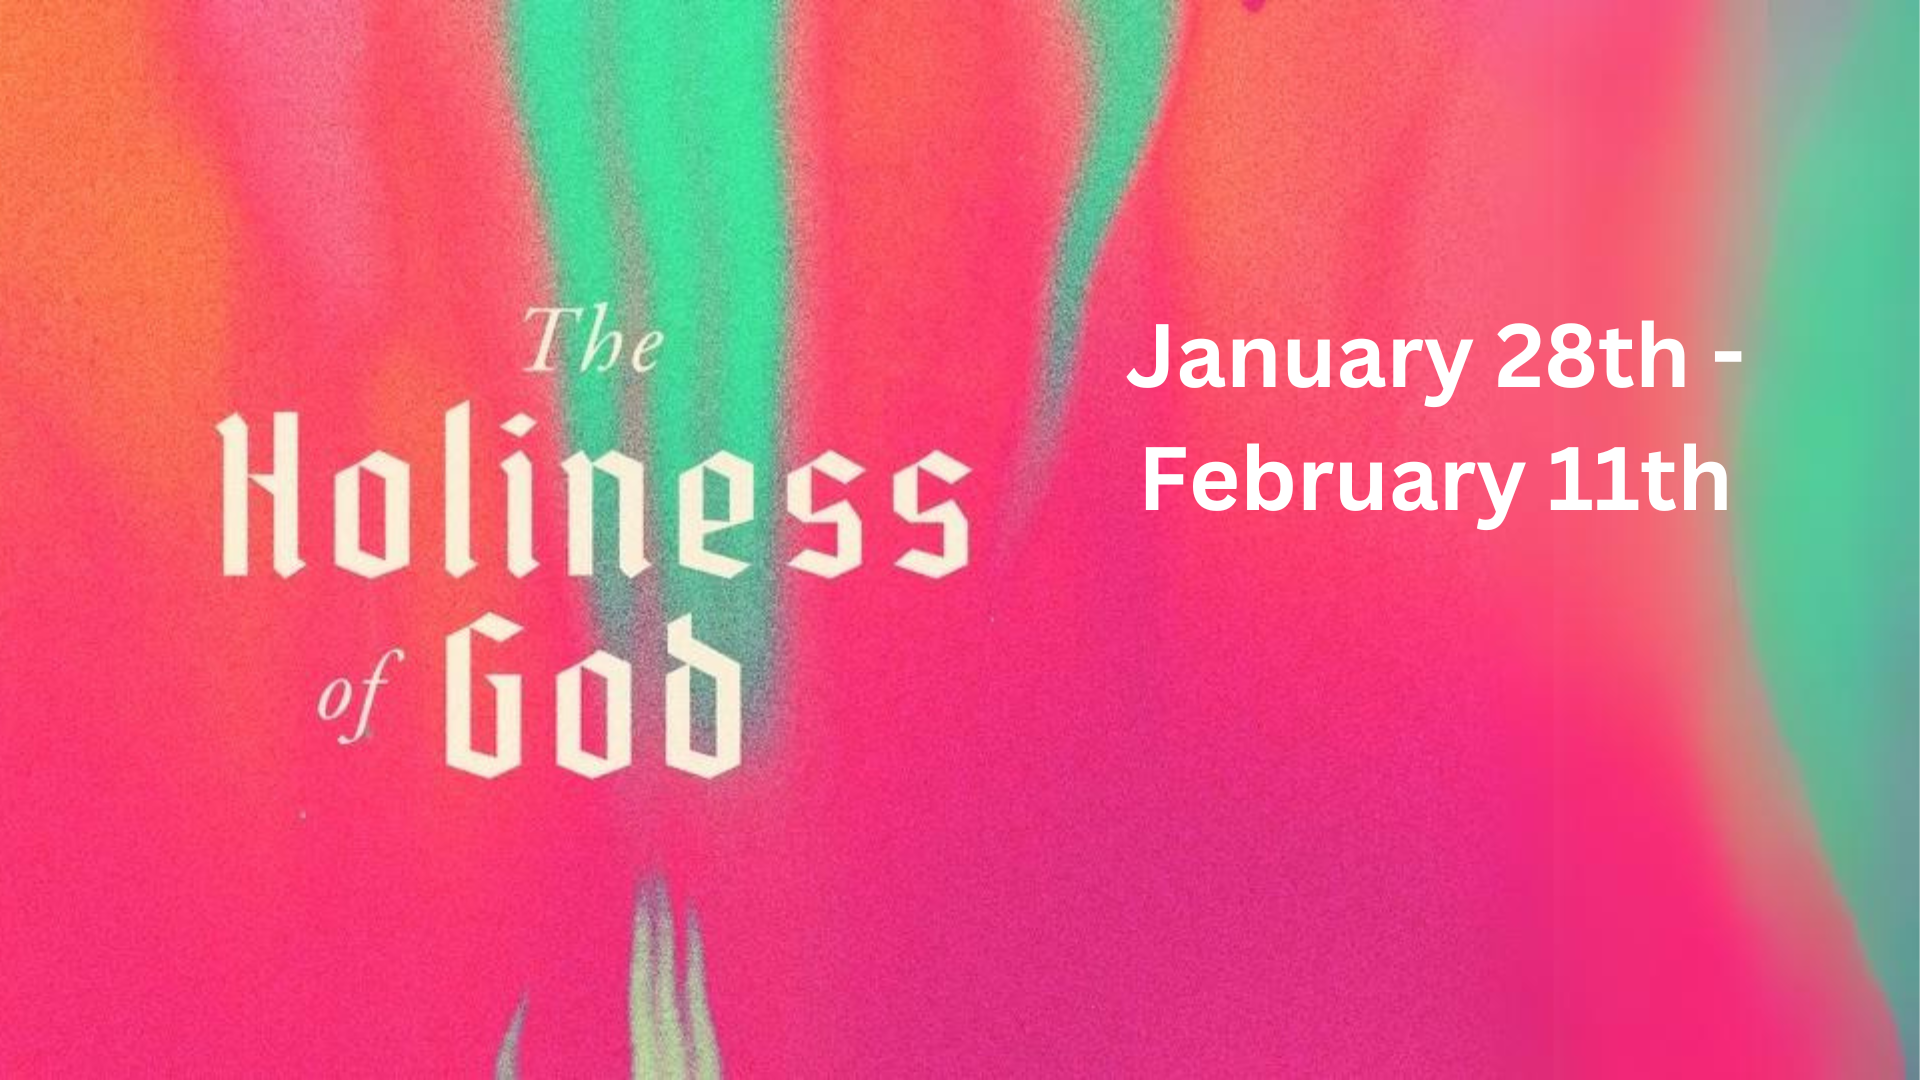 Sermon Series - The Holiness of God